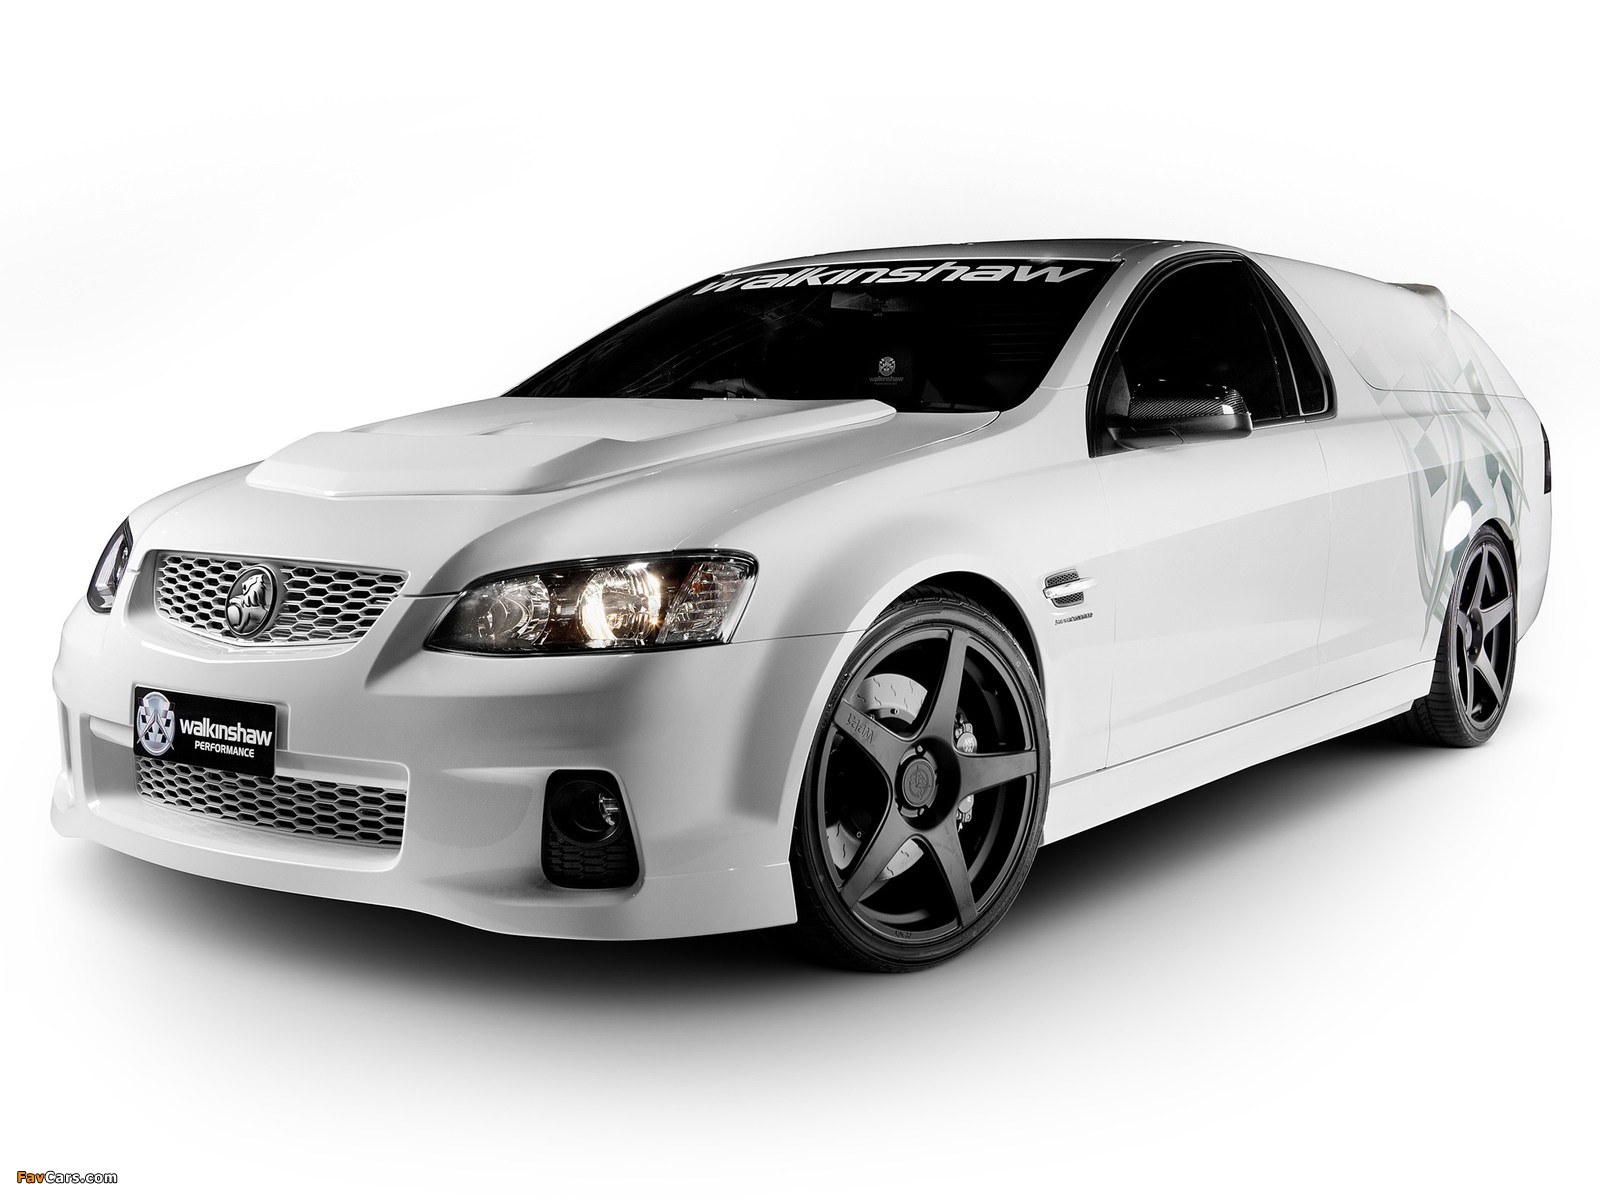 Walkinshaw Performance Holden Commodore SuperUte (VE) 2011 photos (1600 x 1200)